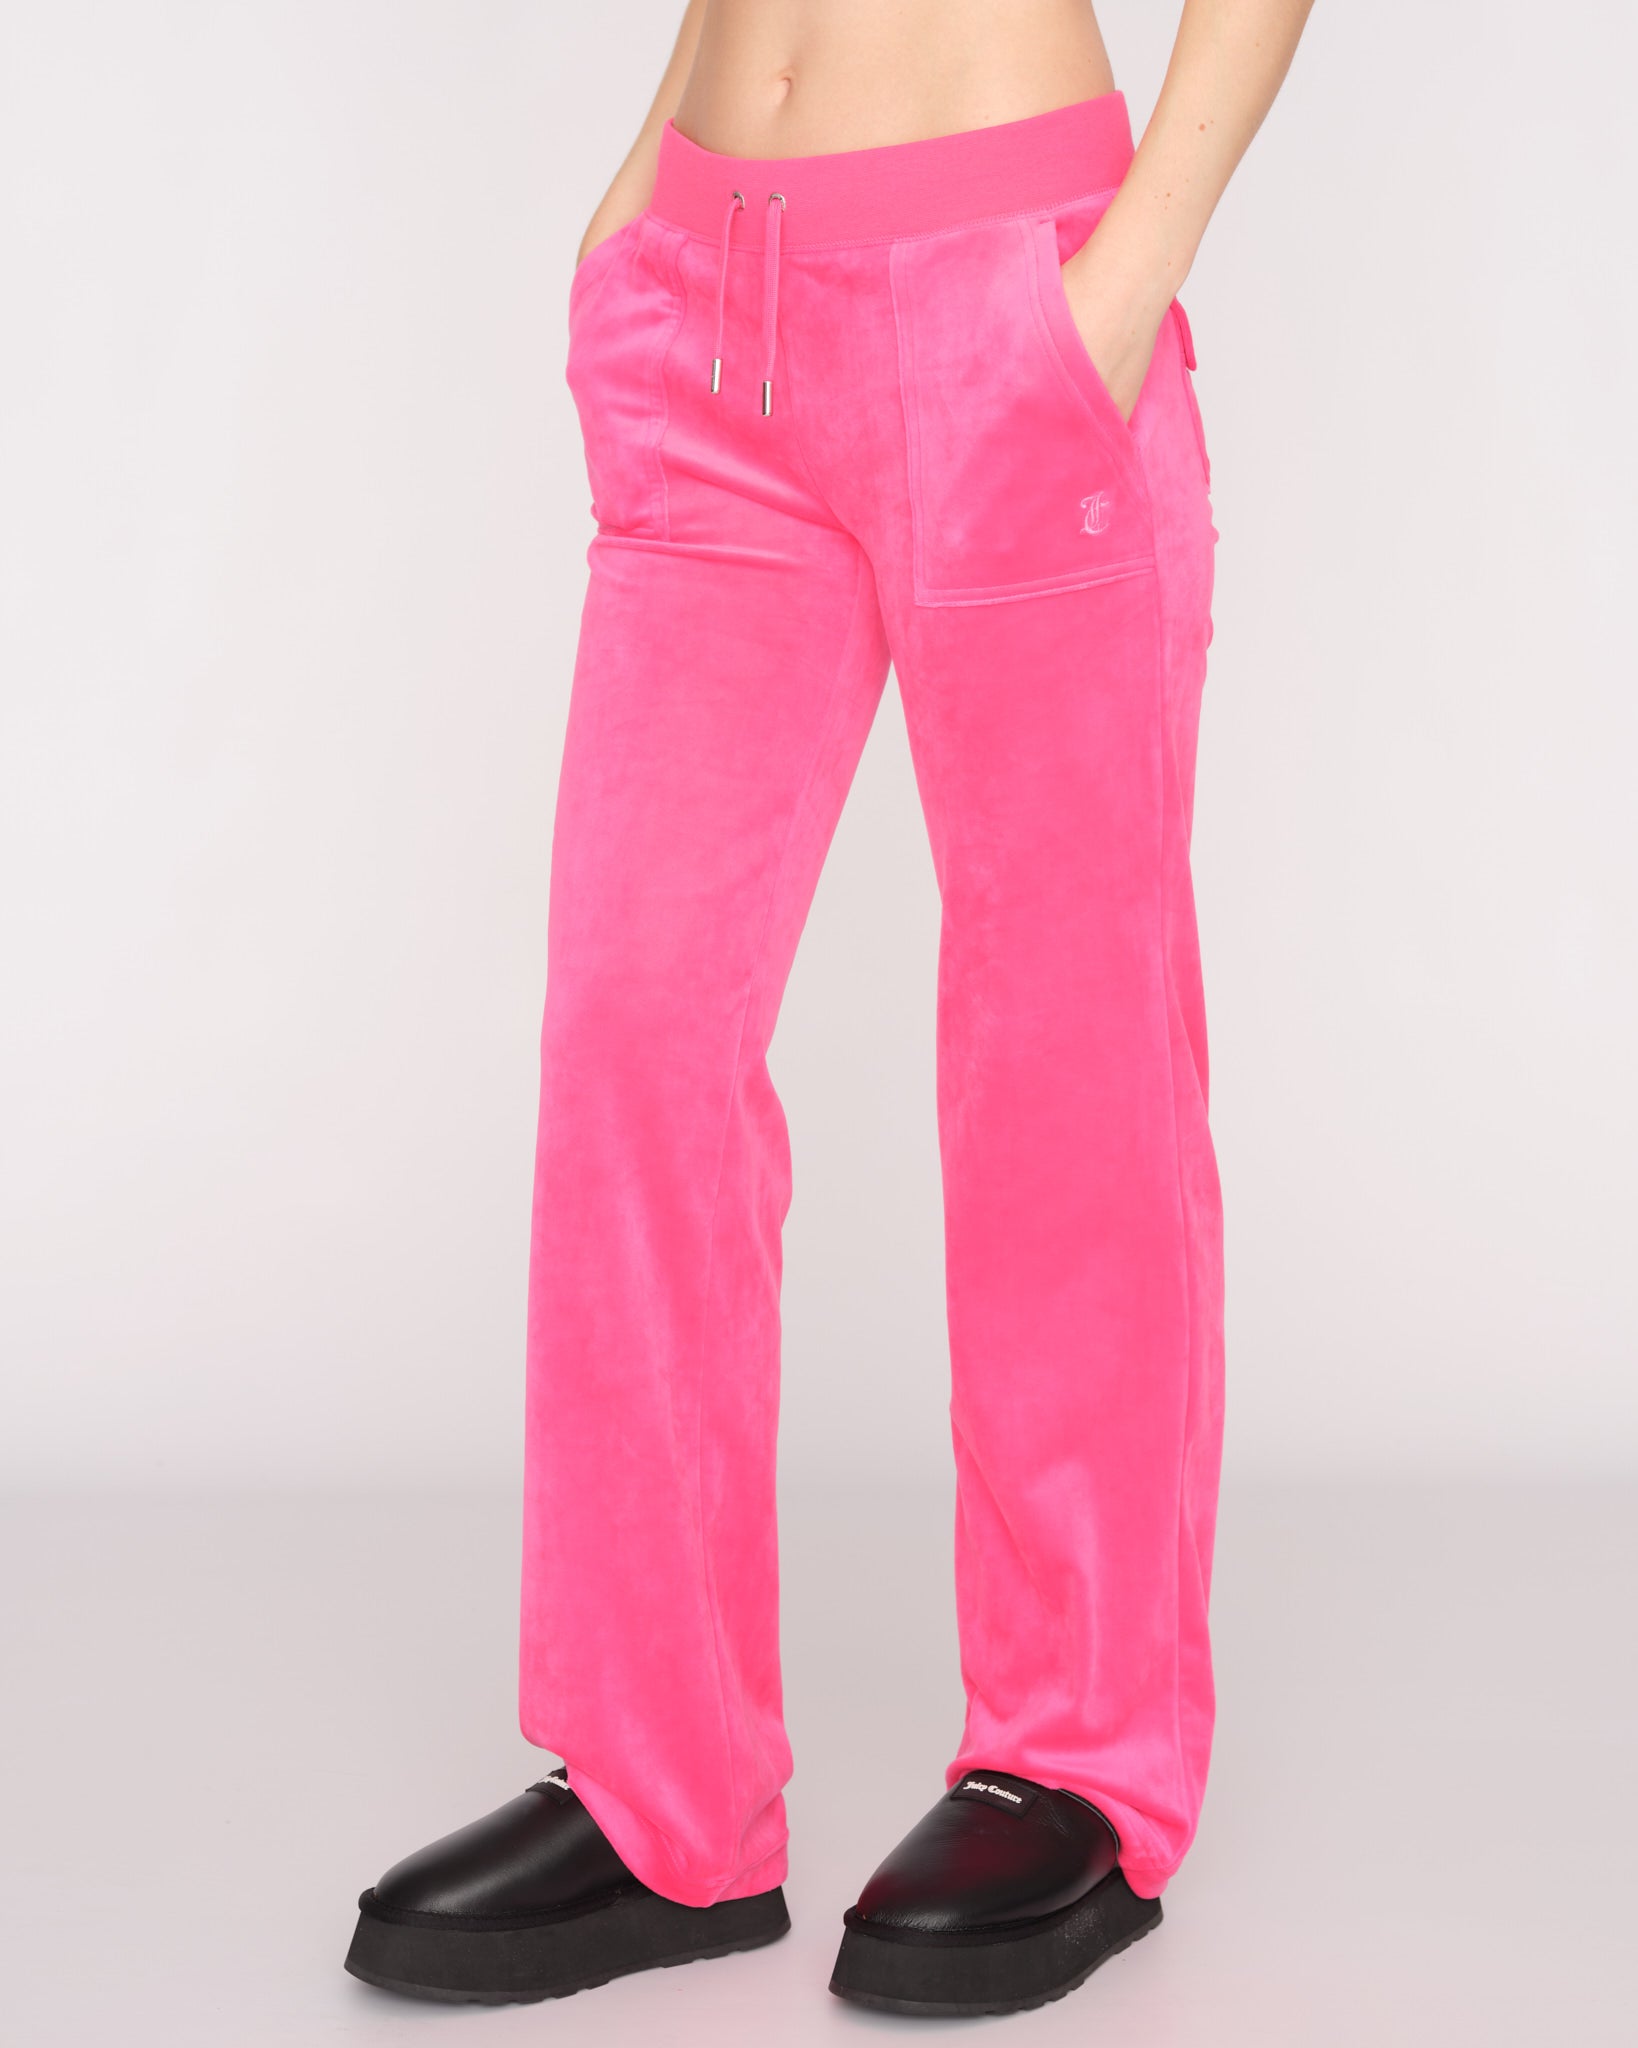 Classic Velour Del Ray Pant Pink Glo - Juicy Couture Scandinavia